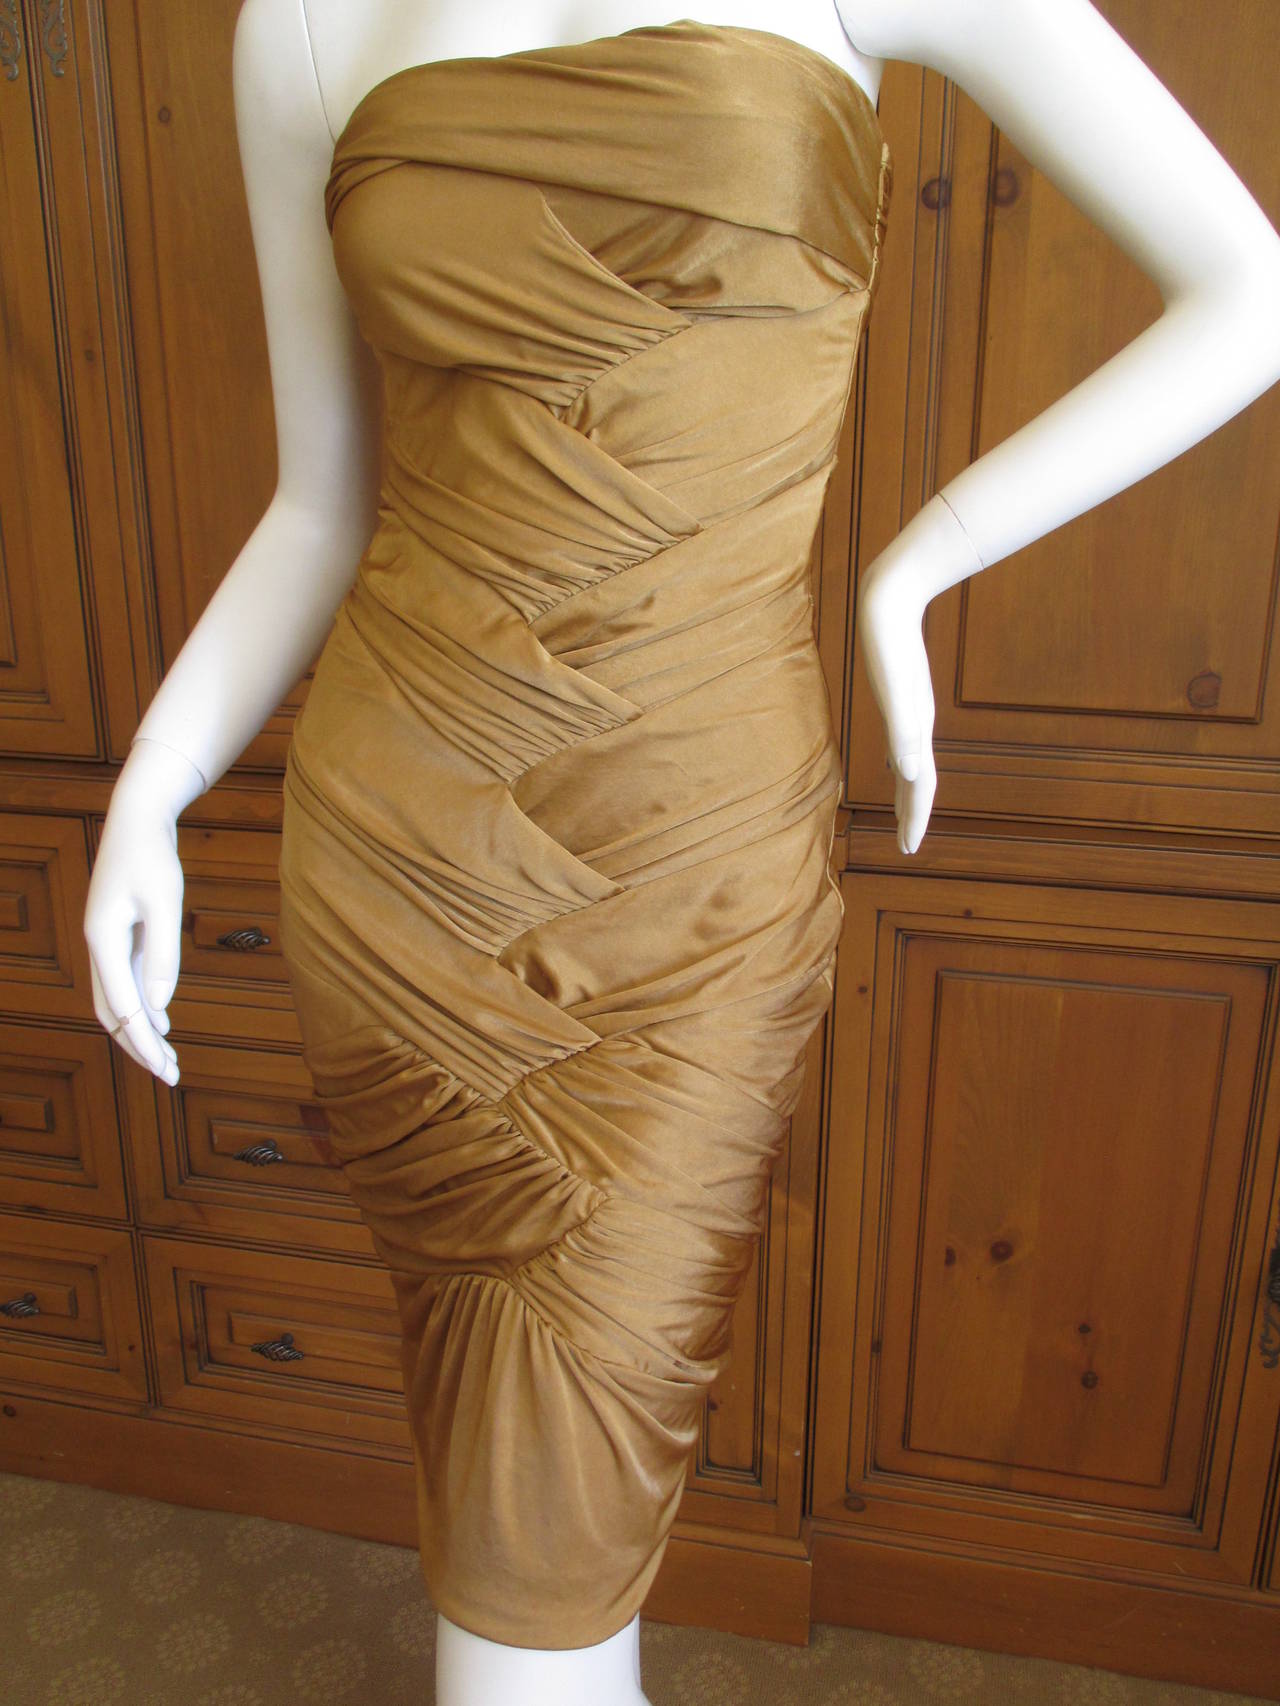 Gucci by Tom Ford Gold Pleated Strapless Dress 
This is so much prettier than the photos show
This is a fine viscose jersey, with a lot of stretch

Sz 40
Bust 35